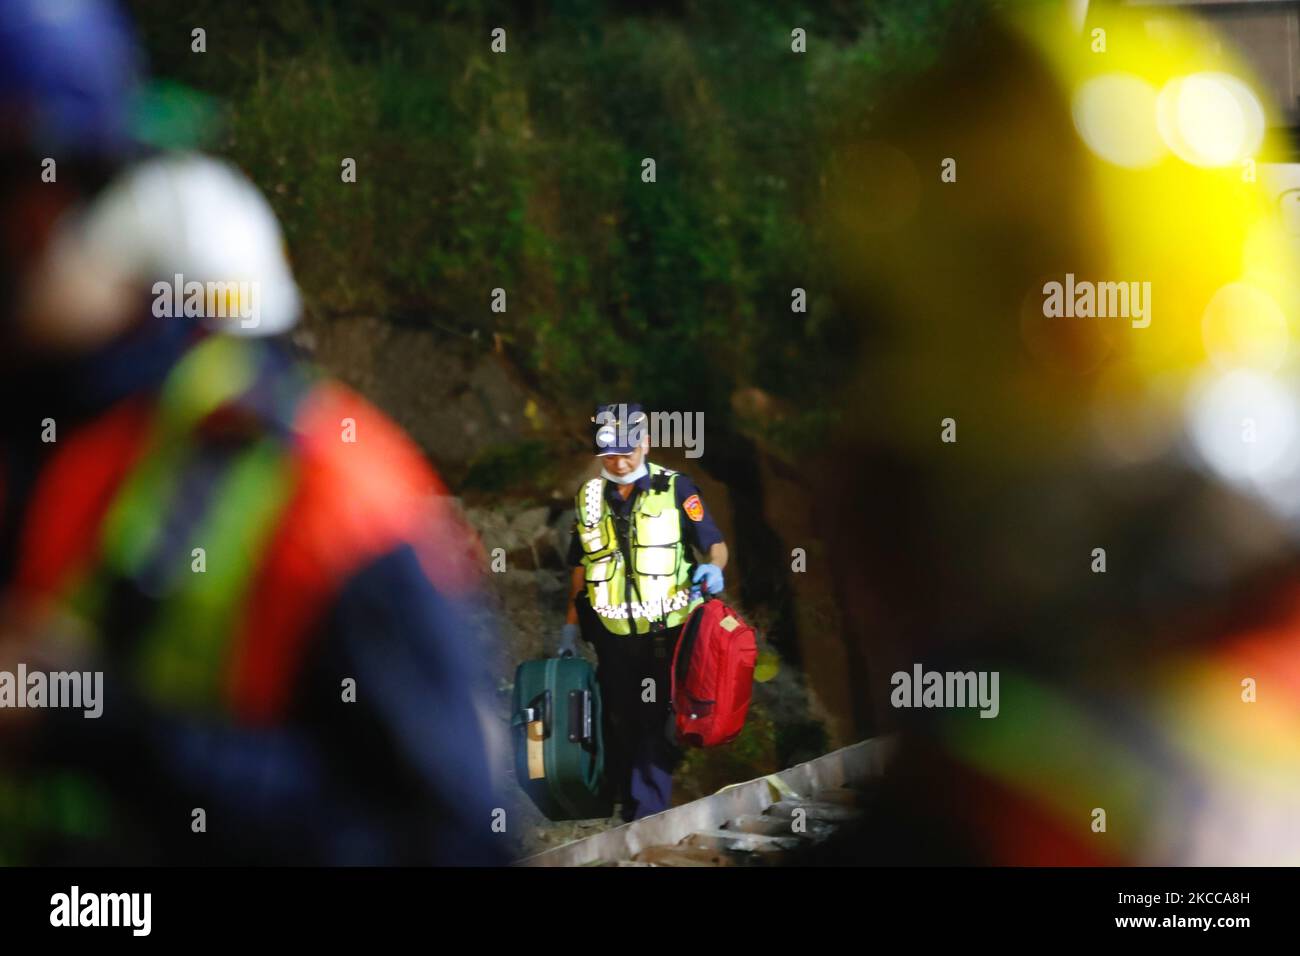 Police officers remove belongings from and conduct investigations at a scene where a train carrying 490 people has been derailed, in Hualien, Taiwan 3 April 2021. The accident has killed at least 50 people, injured dozens and severely damaged the railway. (Photo by Ceng Shou Yi/NurPhoto) Stock Photo